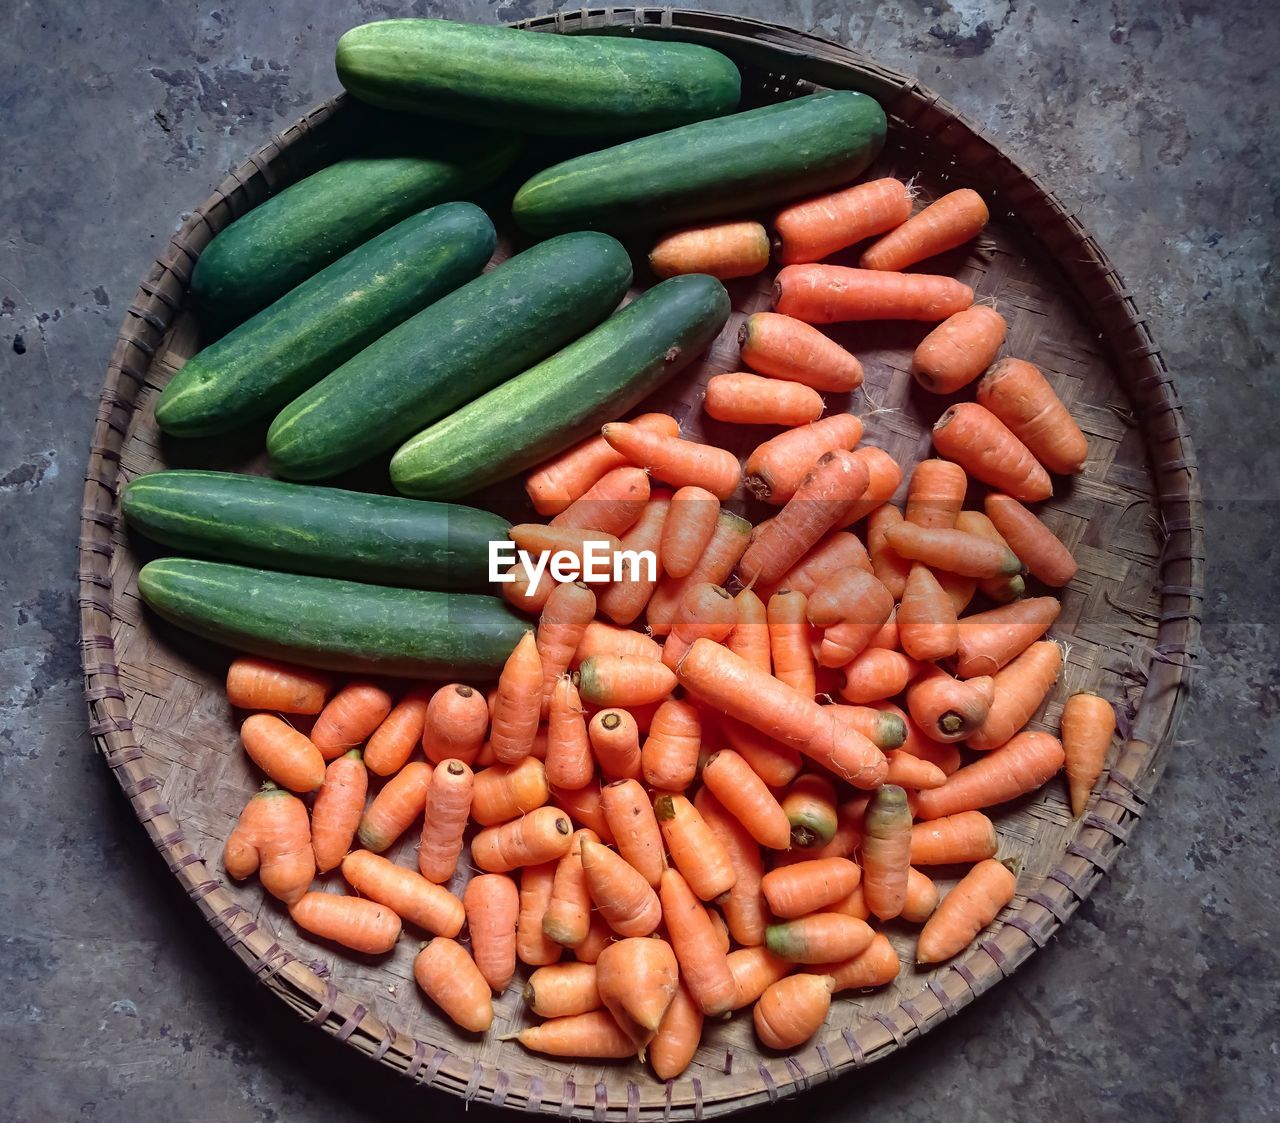 HIGH ANGLE VIEW OF VEGETABLES IN CONTAINER ON TRAY